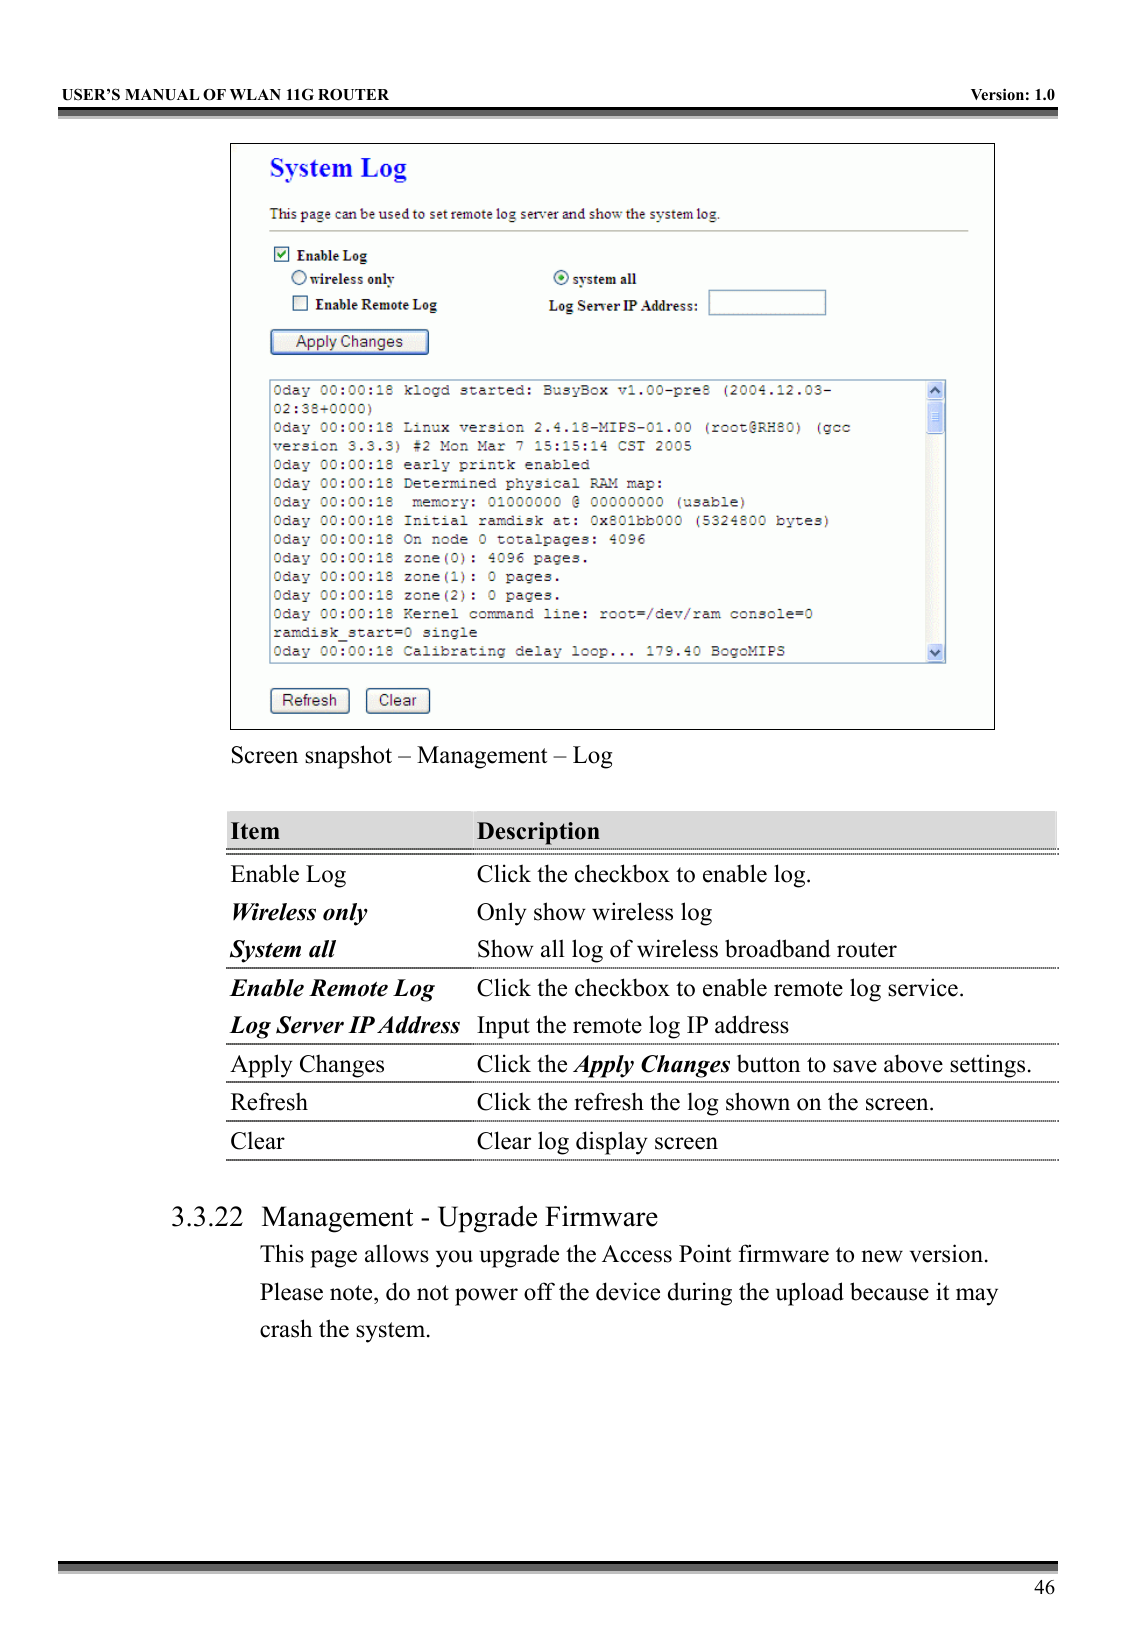   USER’S MANUAL OF WLAN 11G ROUTER    Version: 1.0     46  Screen snapshot – Management – Log  Item  Description   Enable Log Wireless only System all Click the checkbox to enable log. Only show wireless log Show all log of wireless broadband router Enable Remote Log Log Server IP Address Click the checkbox to enable remote log service. Input the remote log IP address Apply Changes  Click the Apply Changes button to save above settings. Refresh  Click the refresh the log shown on the screen. Clear  Clear log display screen  3.3.22  Management - Upgrade Firmware This page allows you upgrade the Access Point firmware to new version. Please note, do not power off the device during the upload because it may crash the system.  